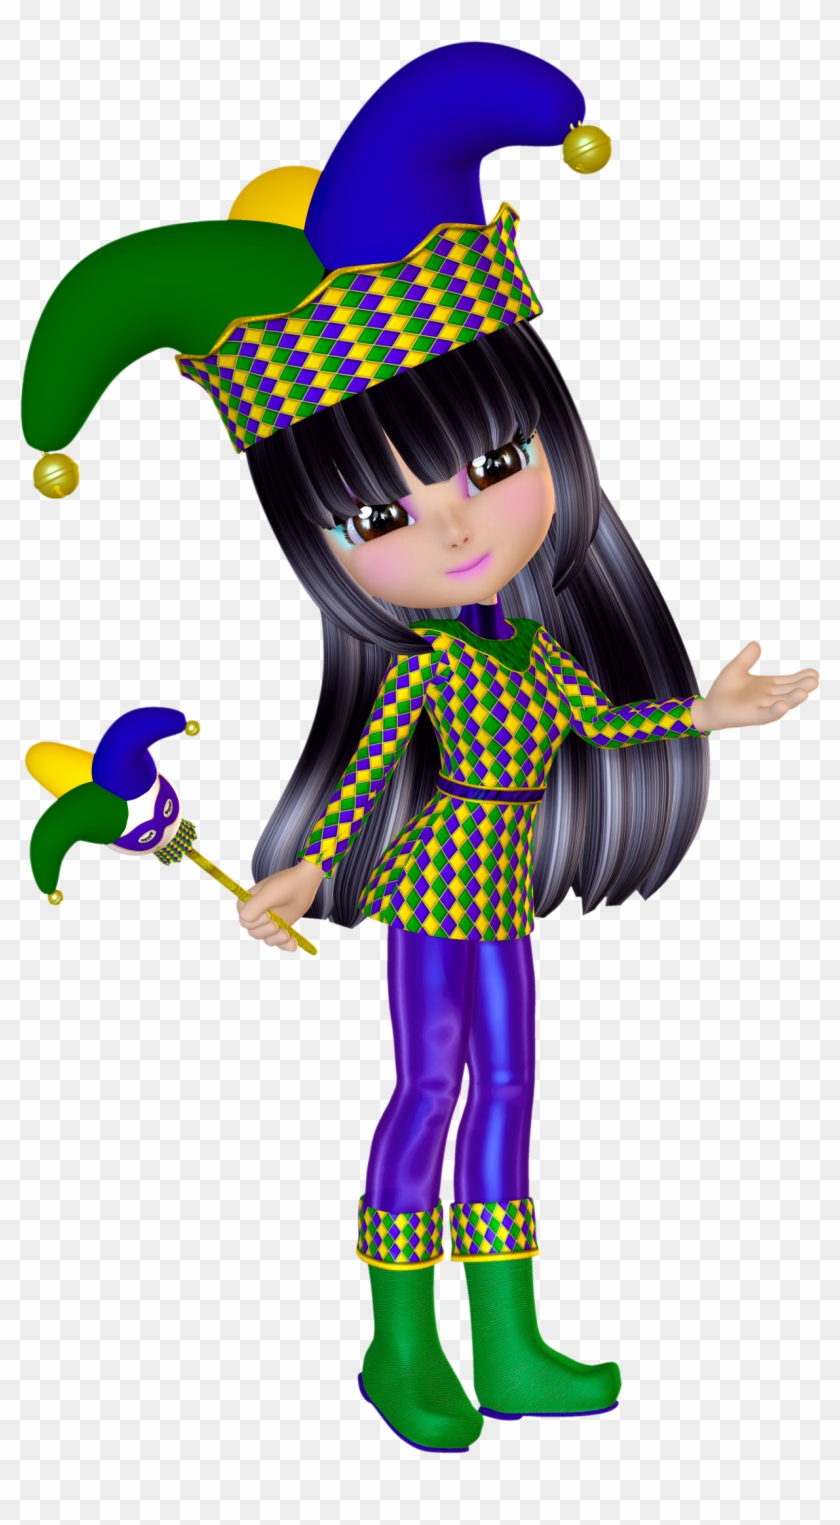 Jester Clipart For Mardi Gras Or Other Special Occasions - Mardi Gras Poser Png #34897